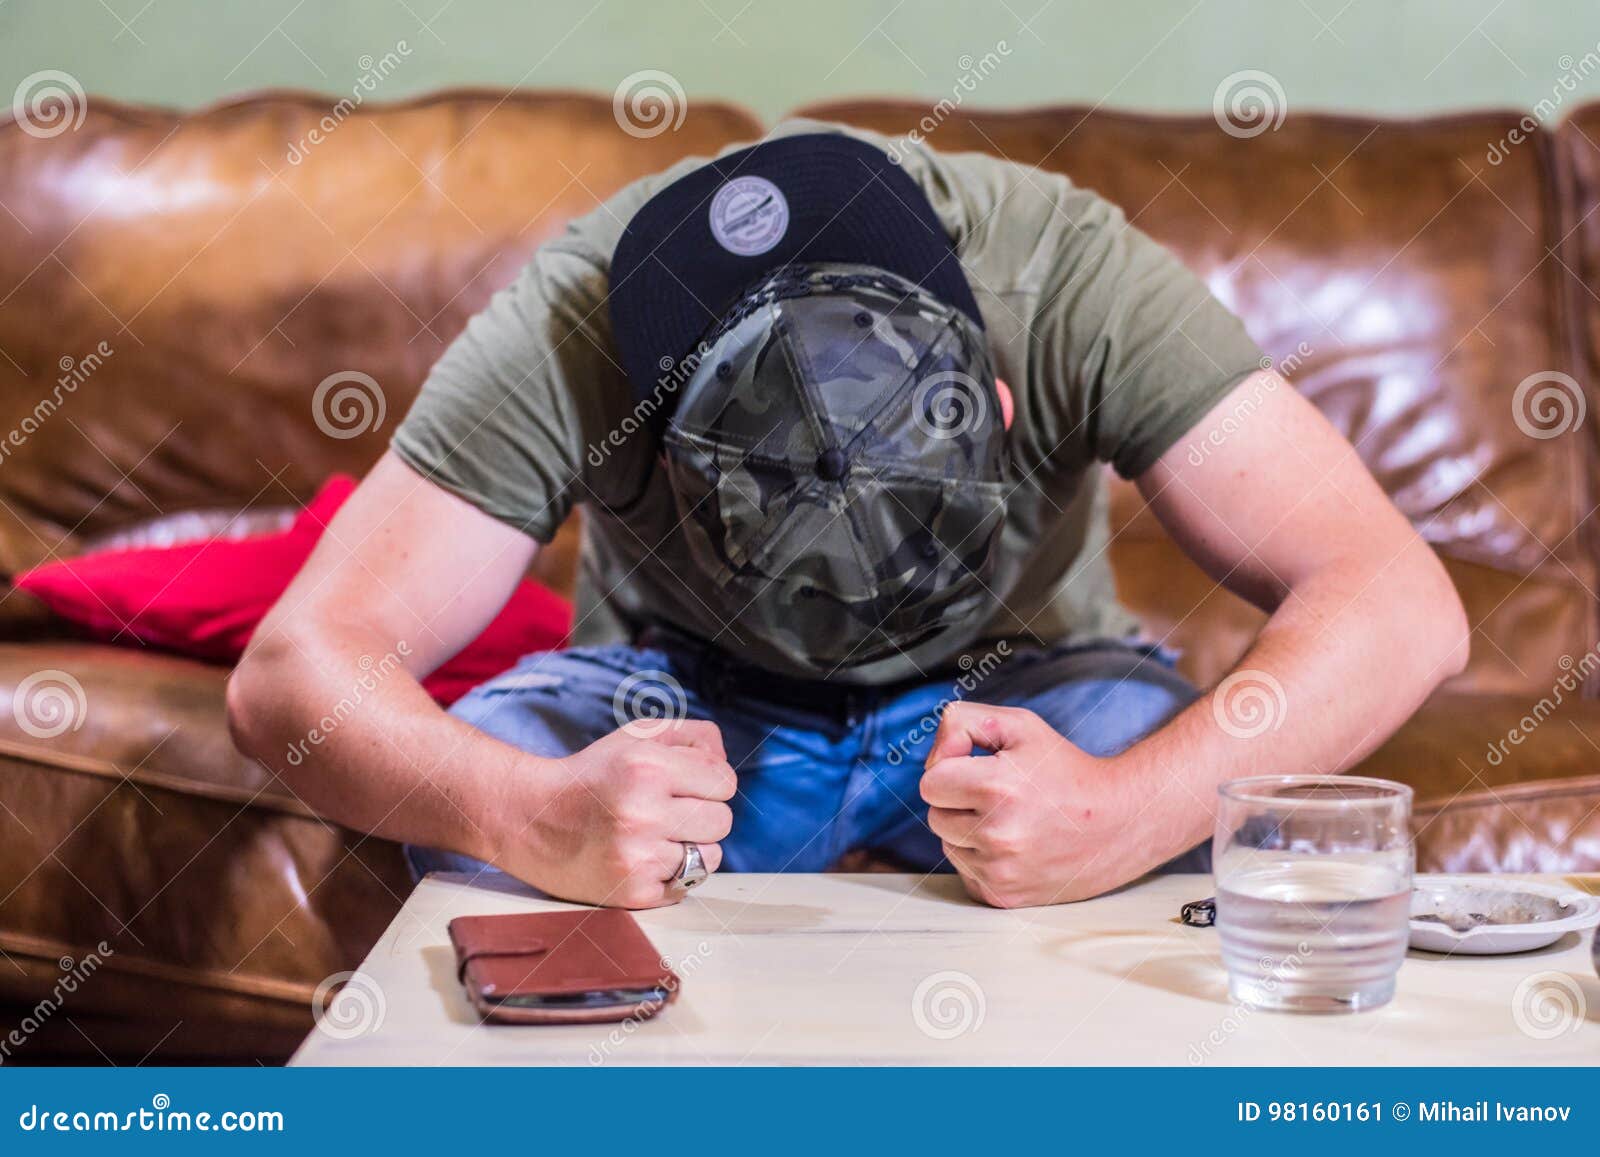 Angry Gamer Slamming His Fists On The Table Stock Image Image Of Fail Close 98160161